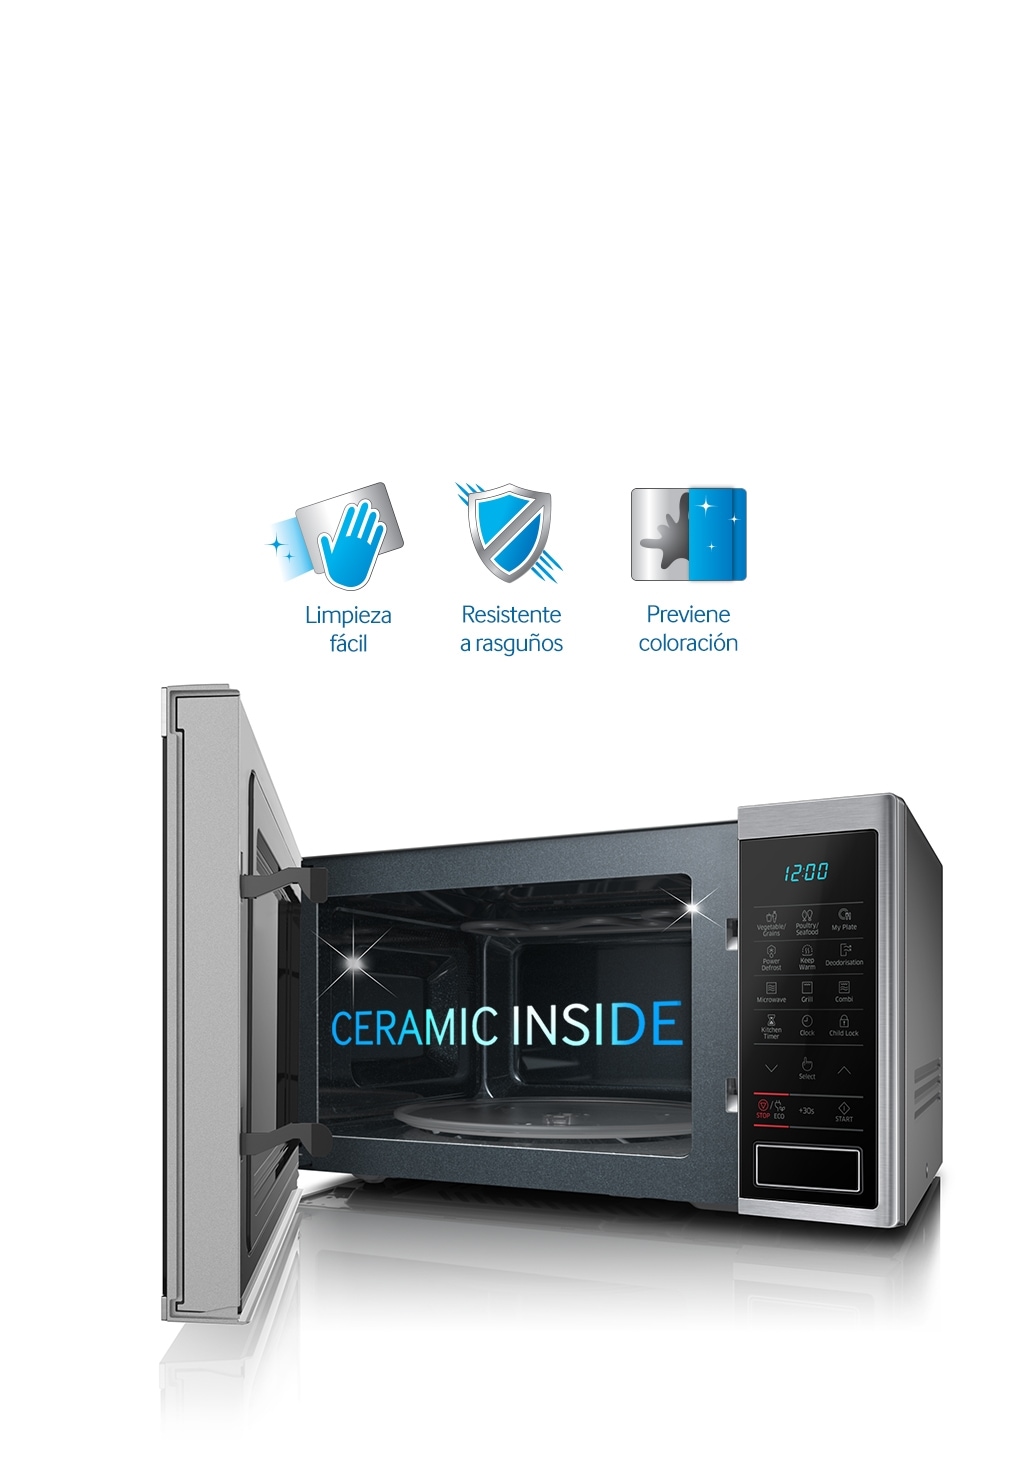 https://images.samsung.com/is/image/samsung/mx-feature-microwave-oven-grill-mg40j5133at-61726451?$FB_TYPE_A_MO_JPG$